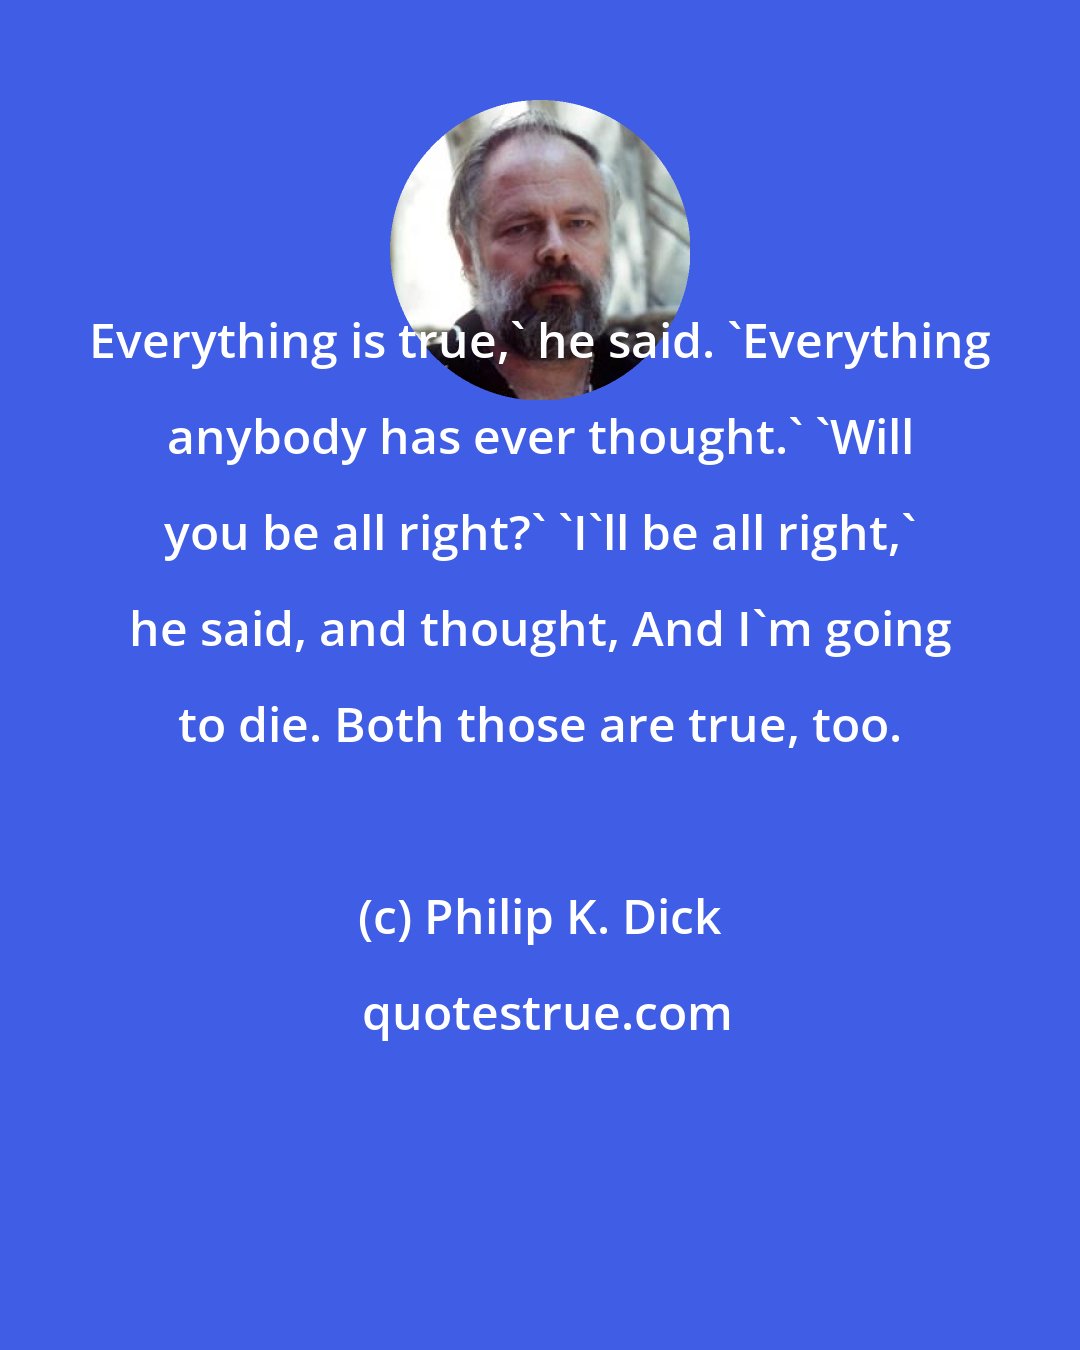 Philip K. Dick: Everything is true,' he said. 'Everything anybody has ever thought.' 'Will you be all right?' 'I'll be all right,' he said, and thought, And I'm going to die. Both those are true, too.